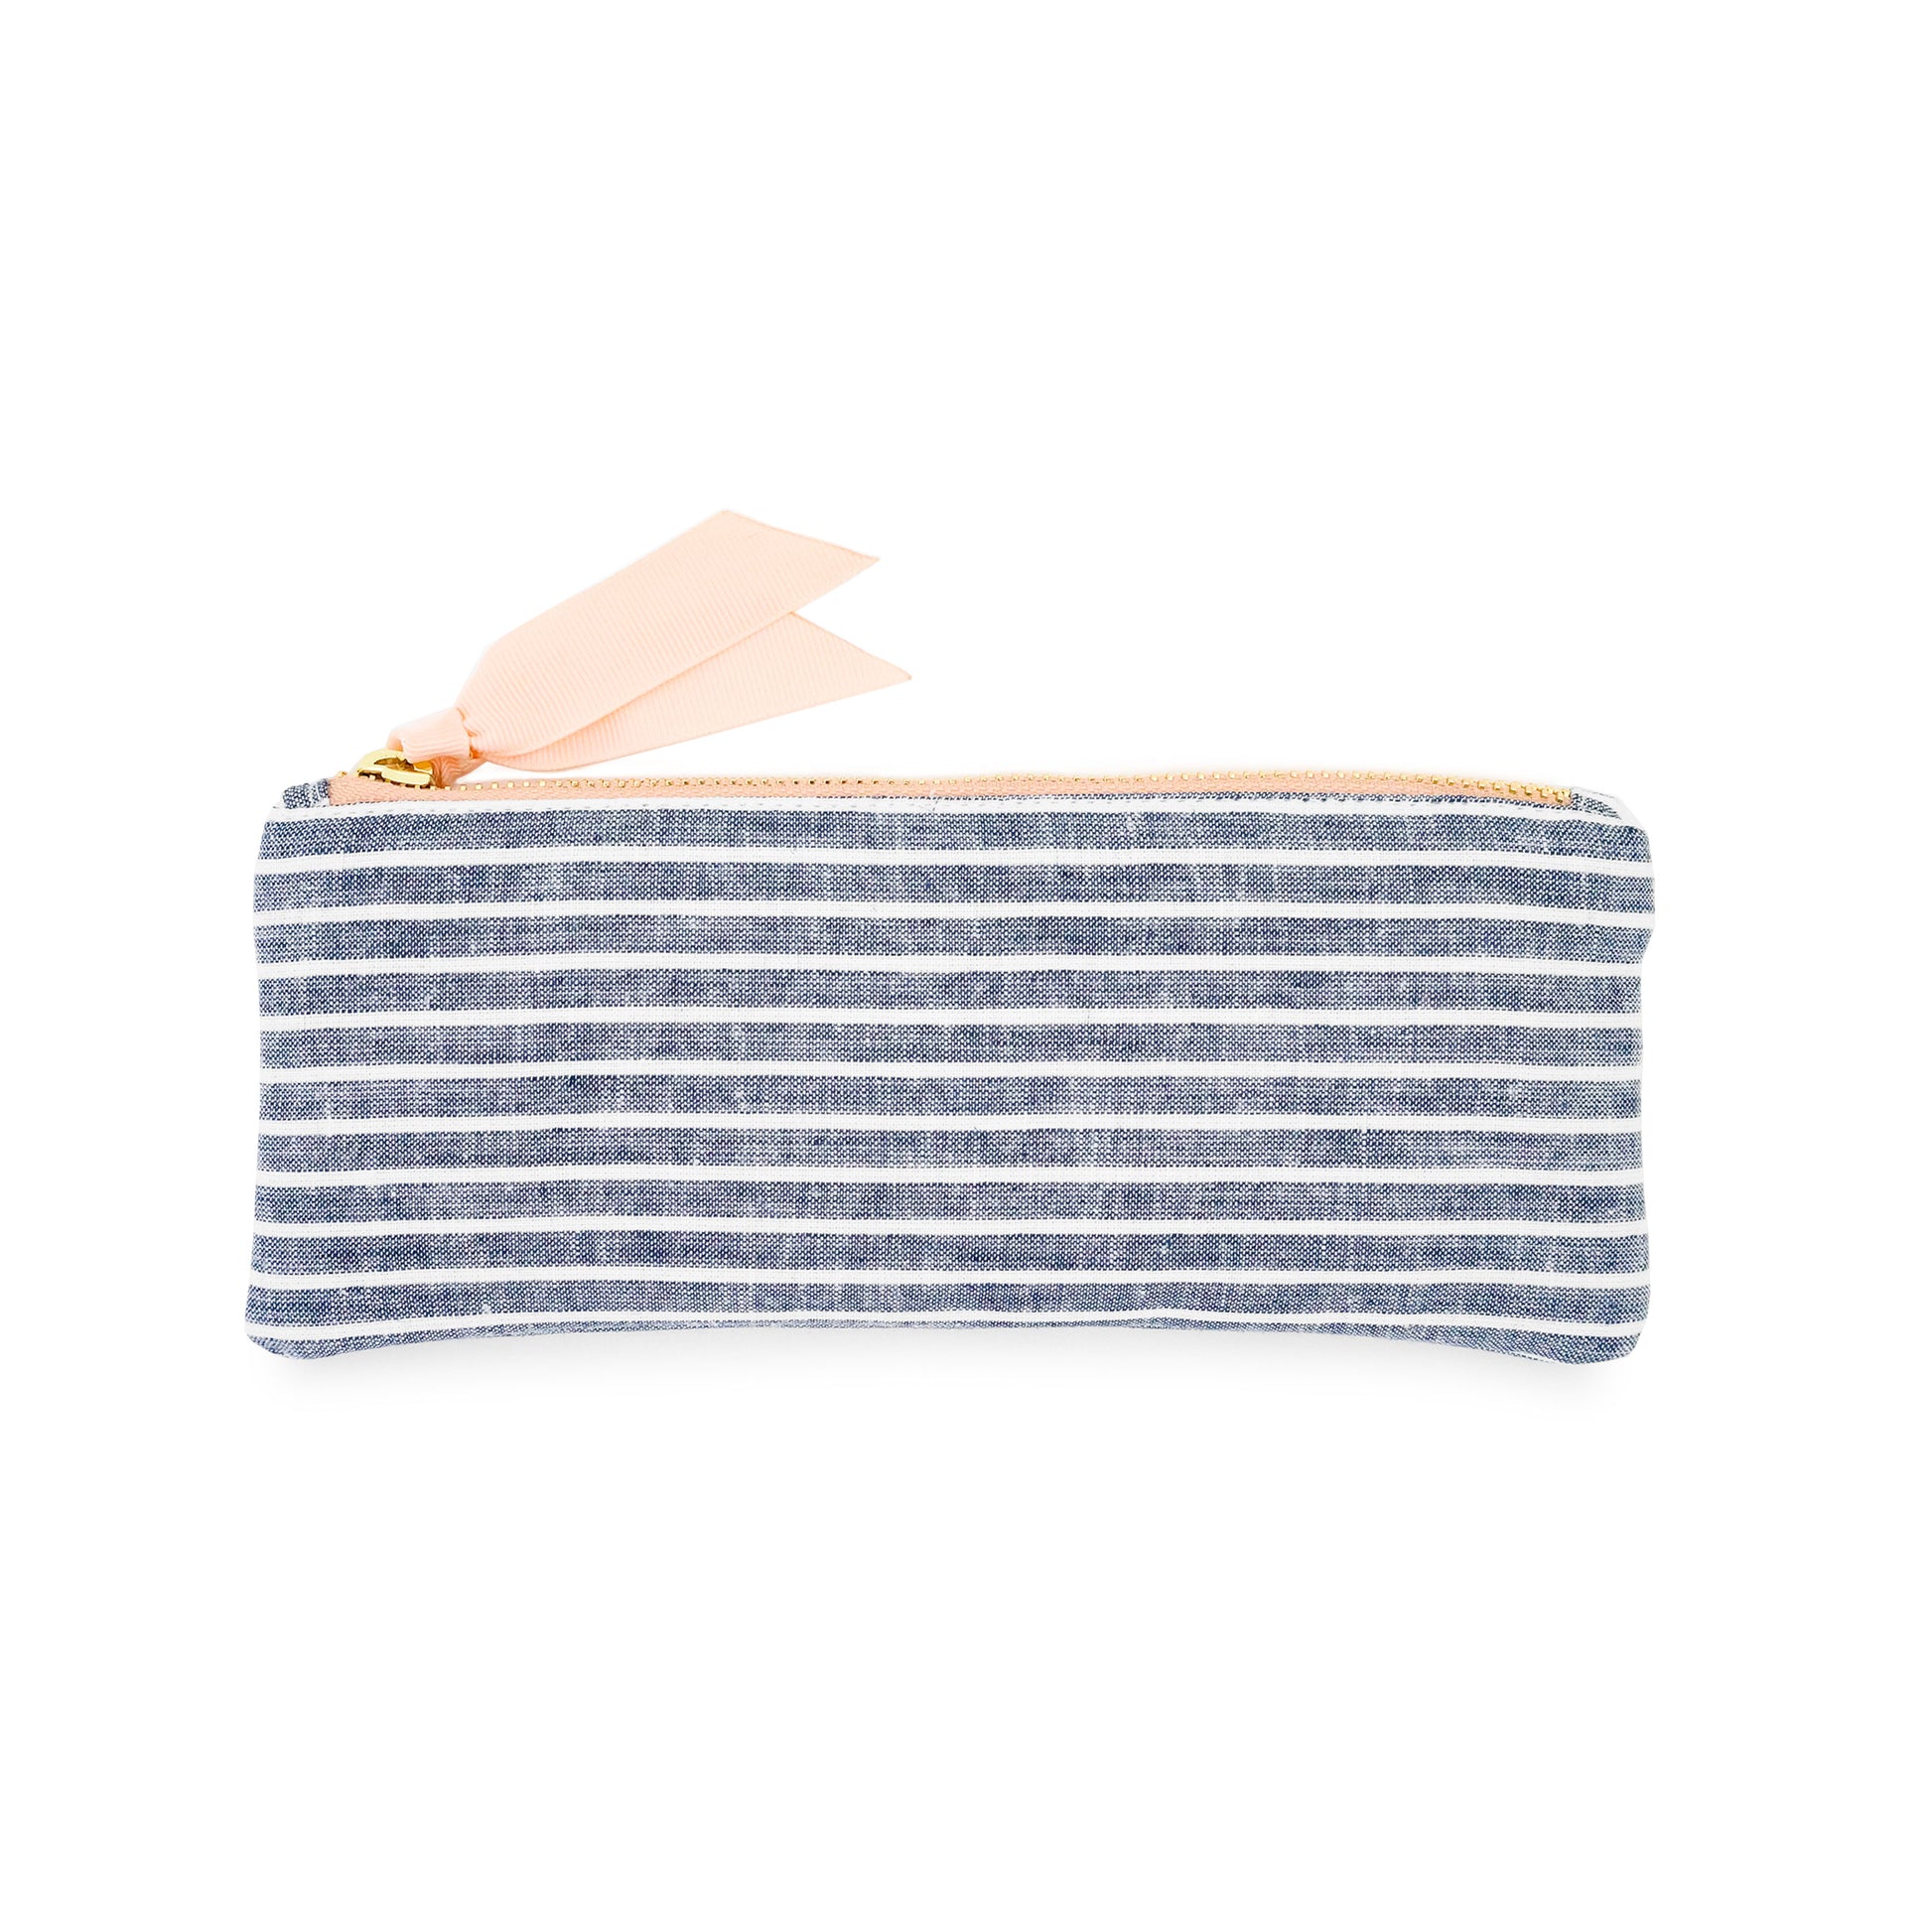 Cute Pencil Pouches for Students and Teachers To Store All the Essentials